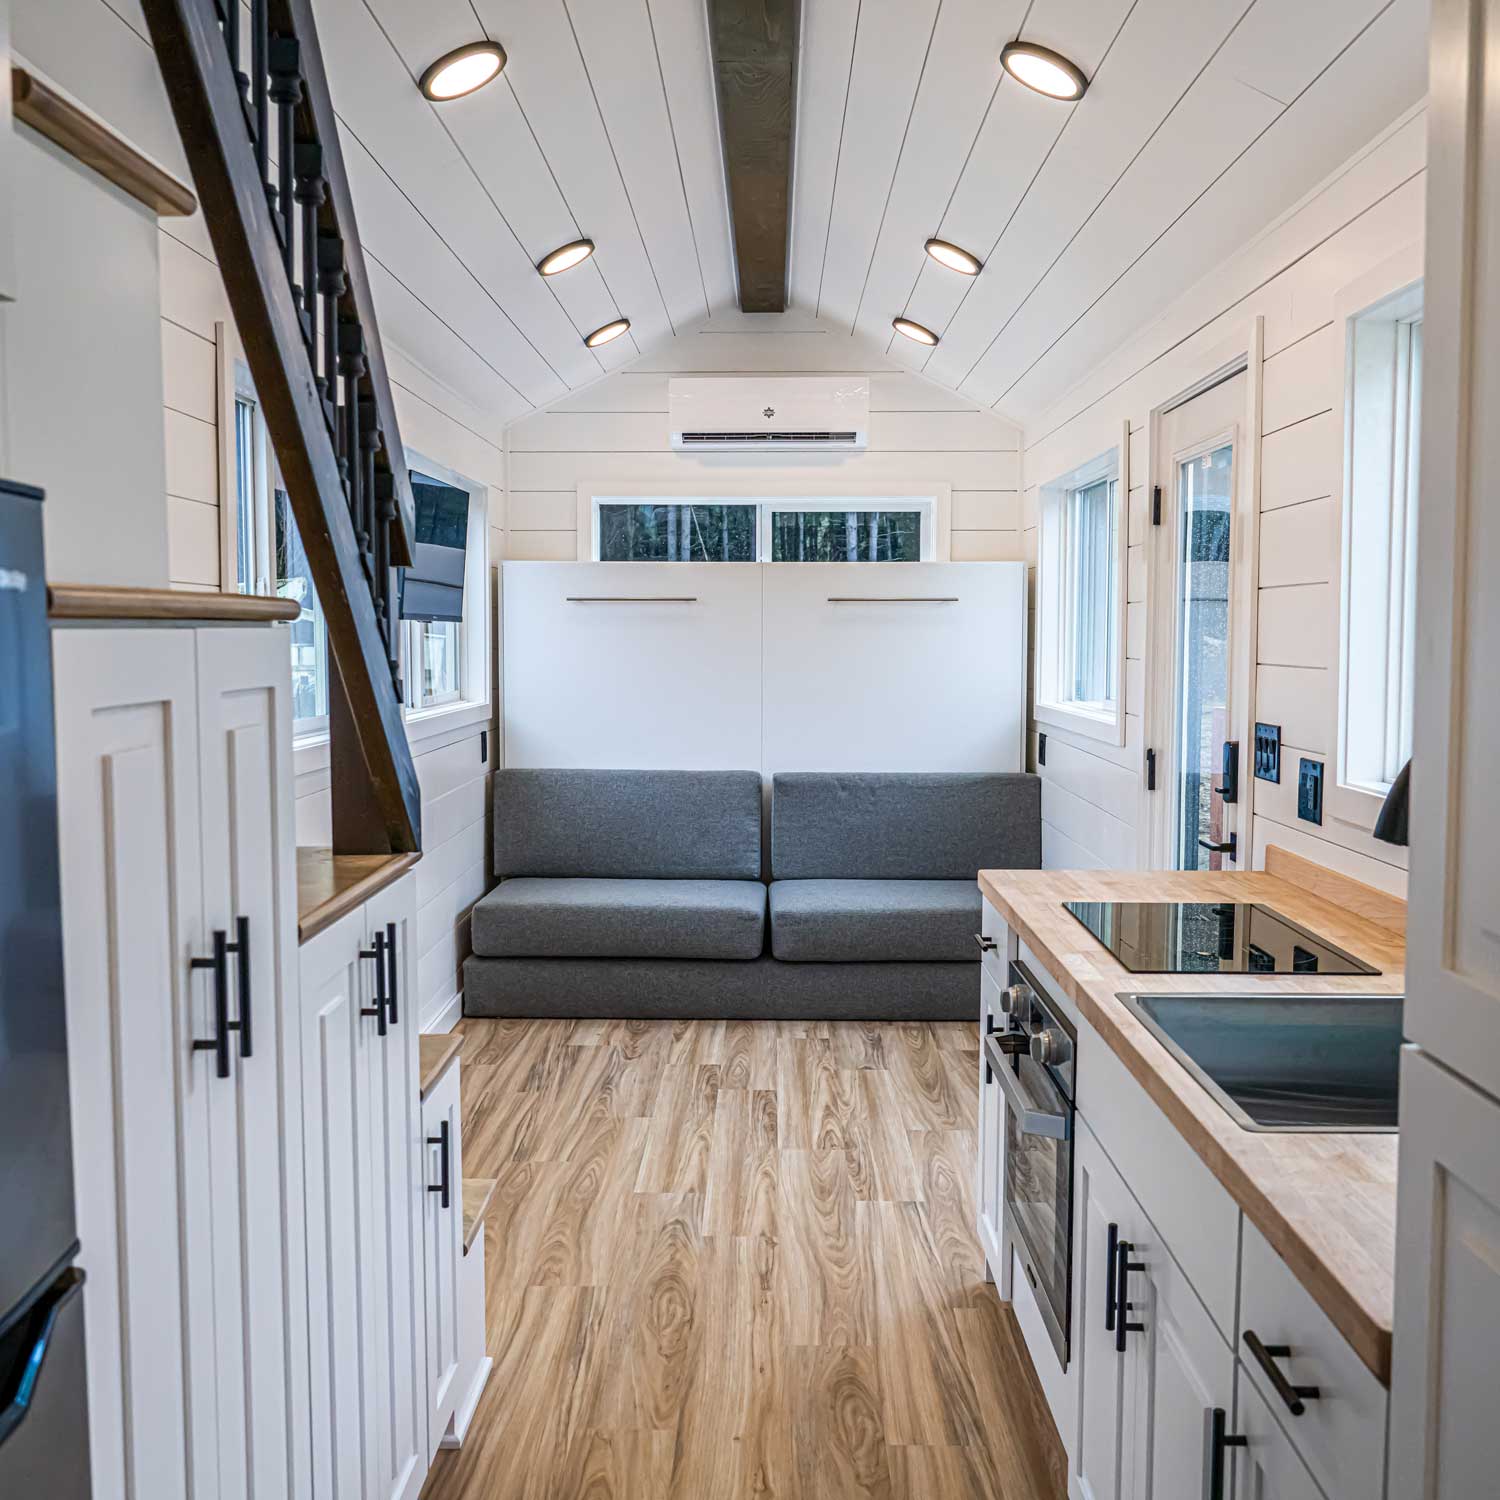 Interior of farmhouse style Heritage tiny home with couch and kitchen